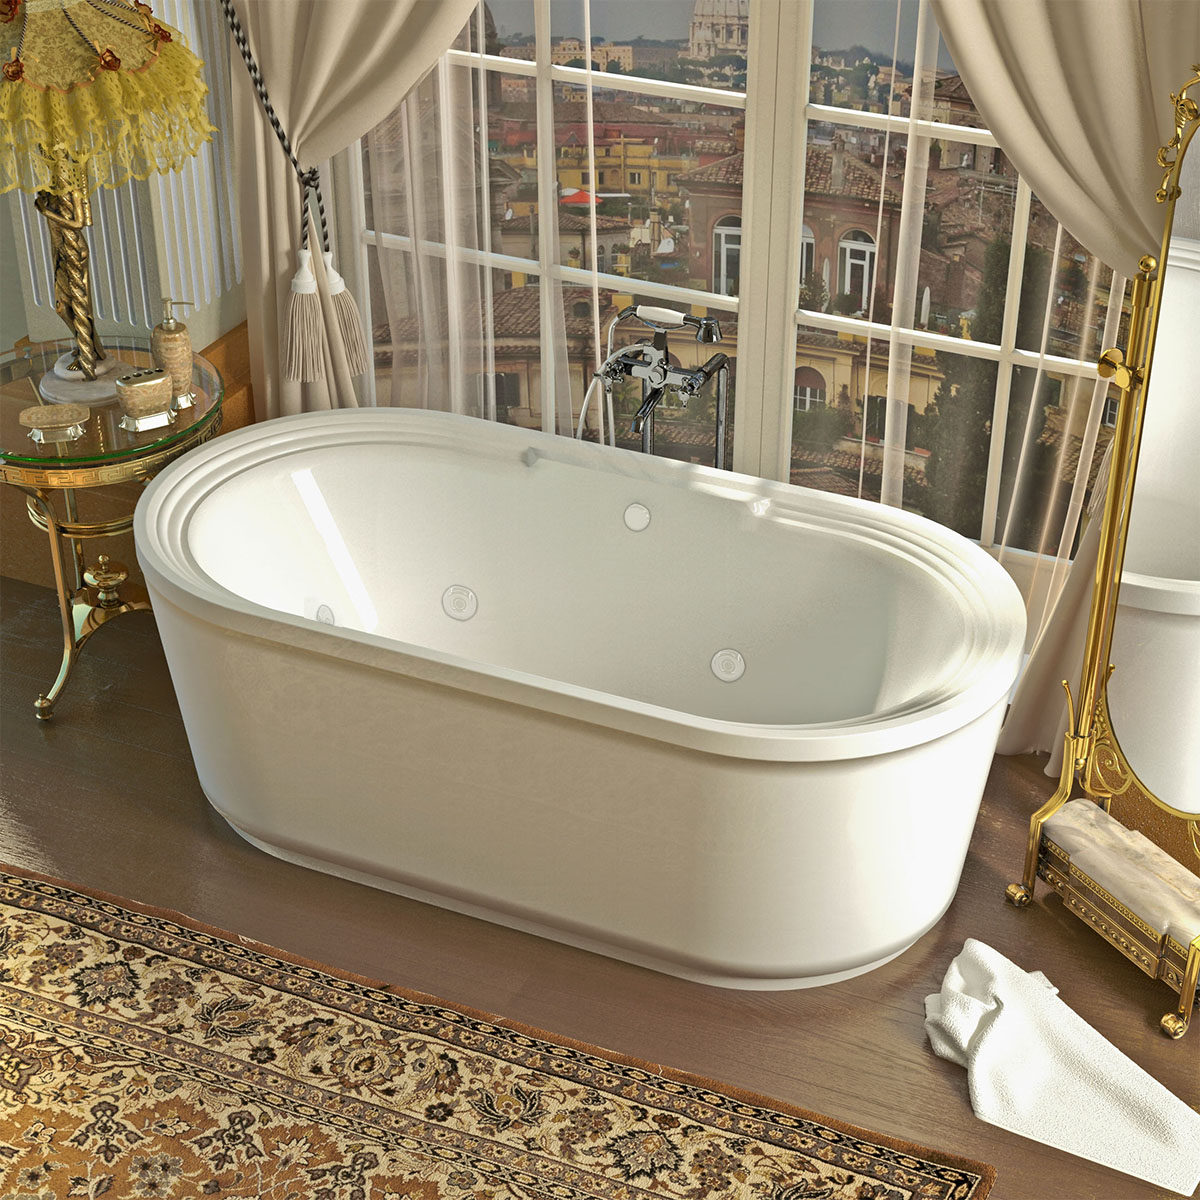 Padre 34 x 67 x 21 in. Oval Freestanding Air & Whirlpool Water Jetted Bathtub